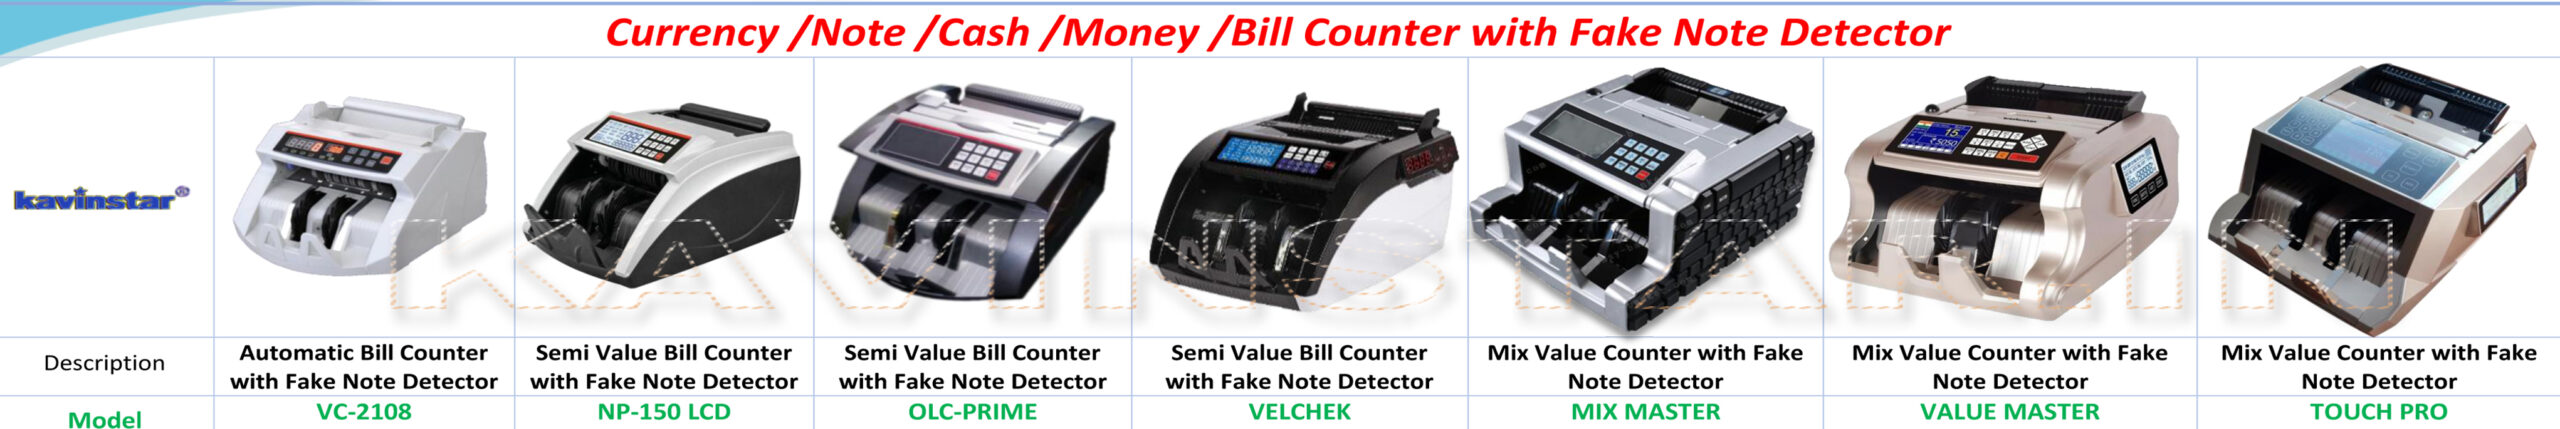 currency-counting-machines-dealers